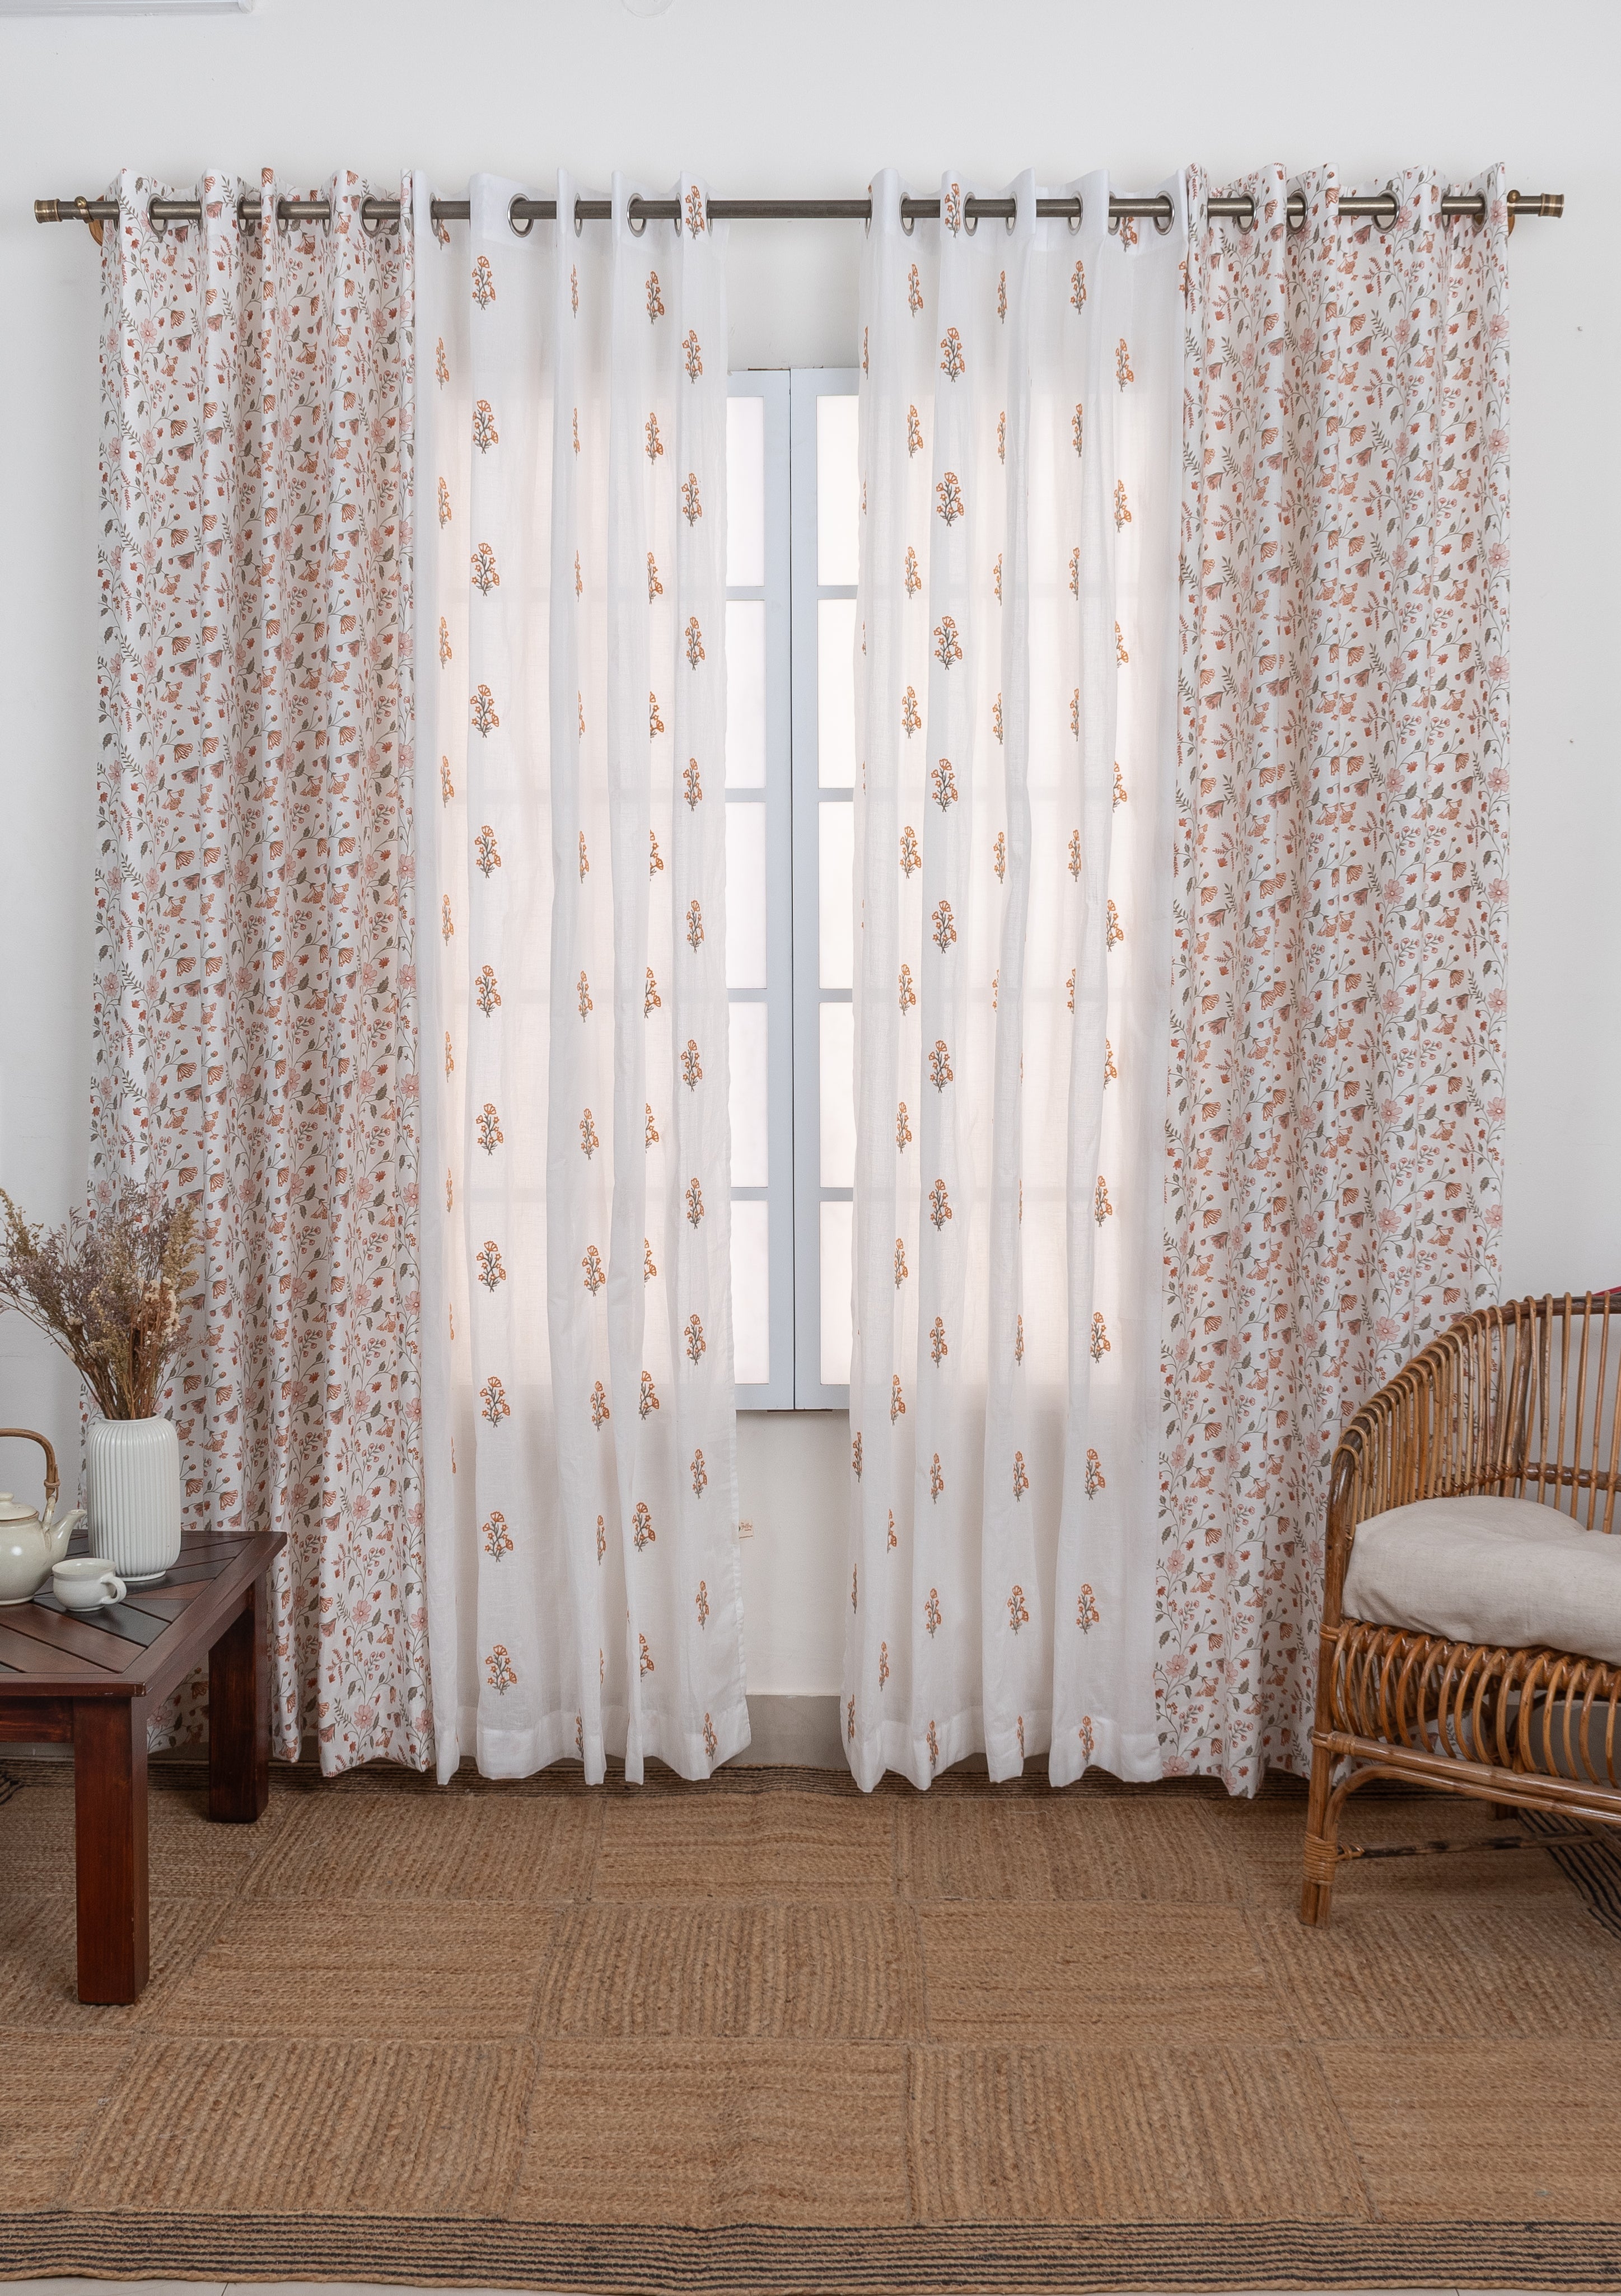 Forest bloom floral cotton curtain with Spring floral sheer orange 100% cotton curtains for living room - Set of 4